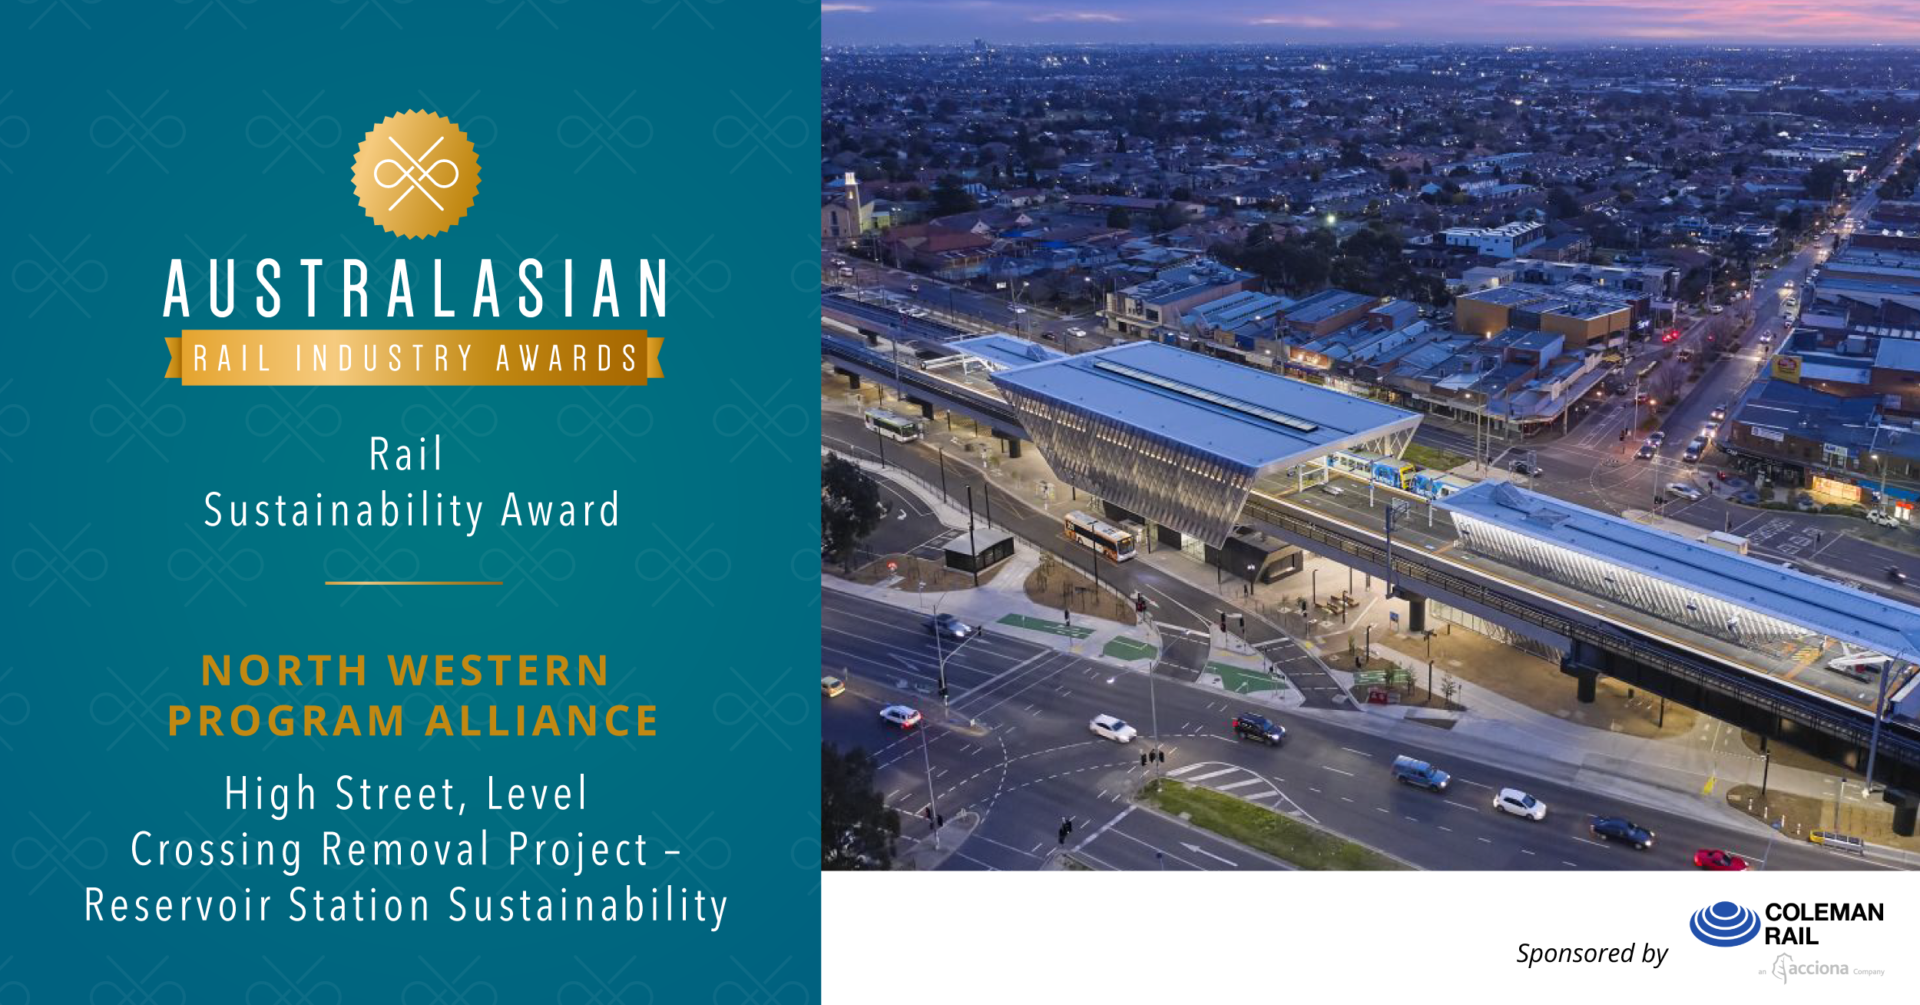 Reservoir station celebrated for sustainability at 2021 Australasian Rail Industry awards